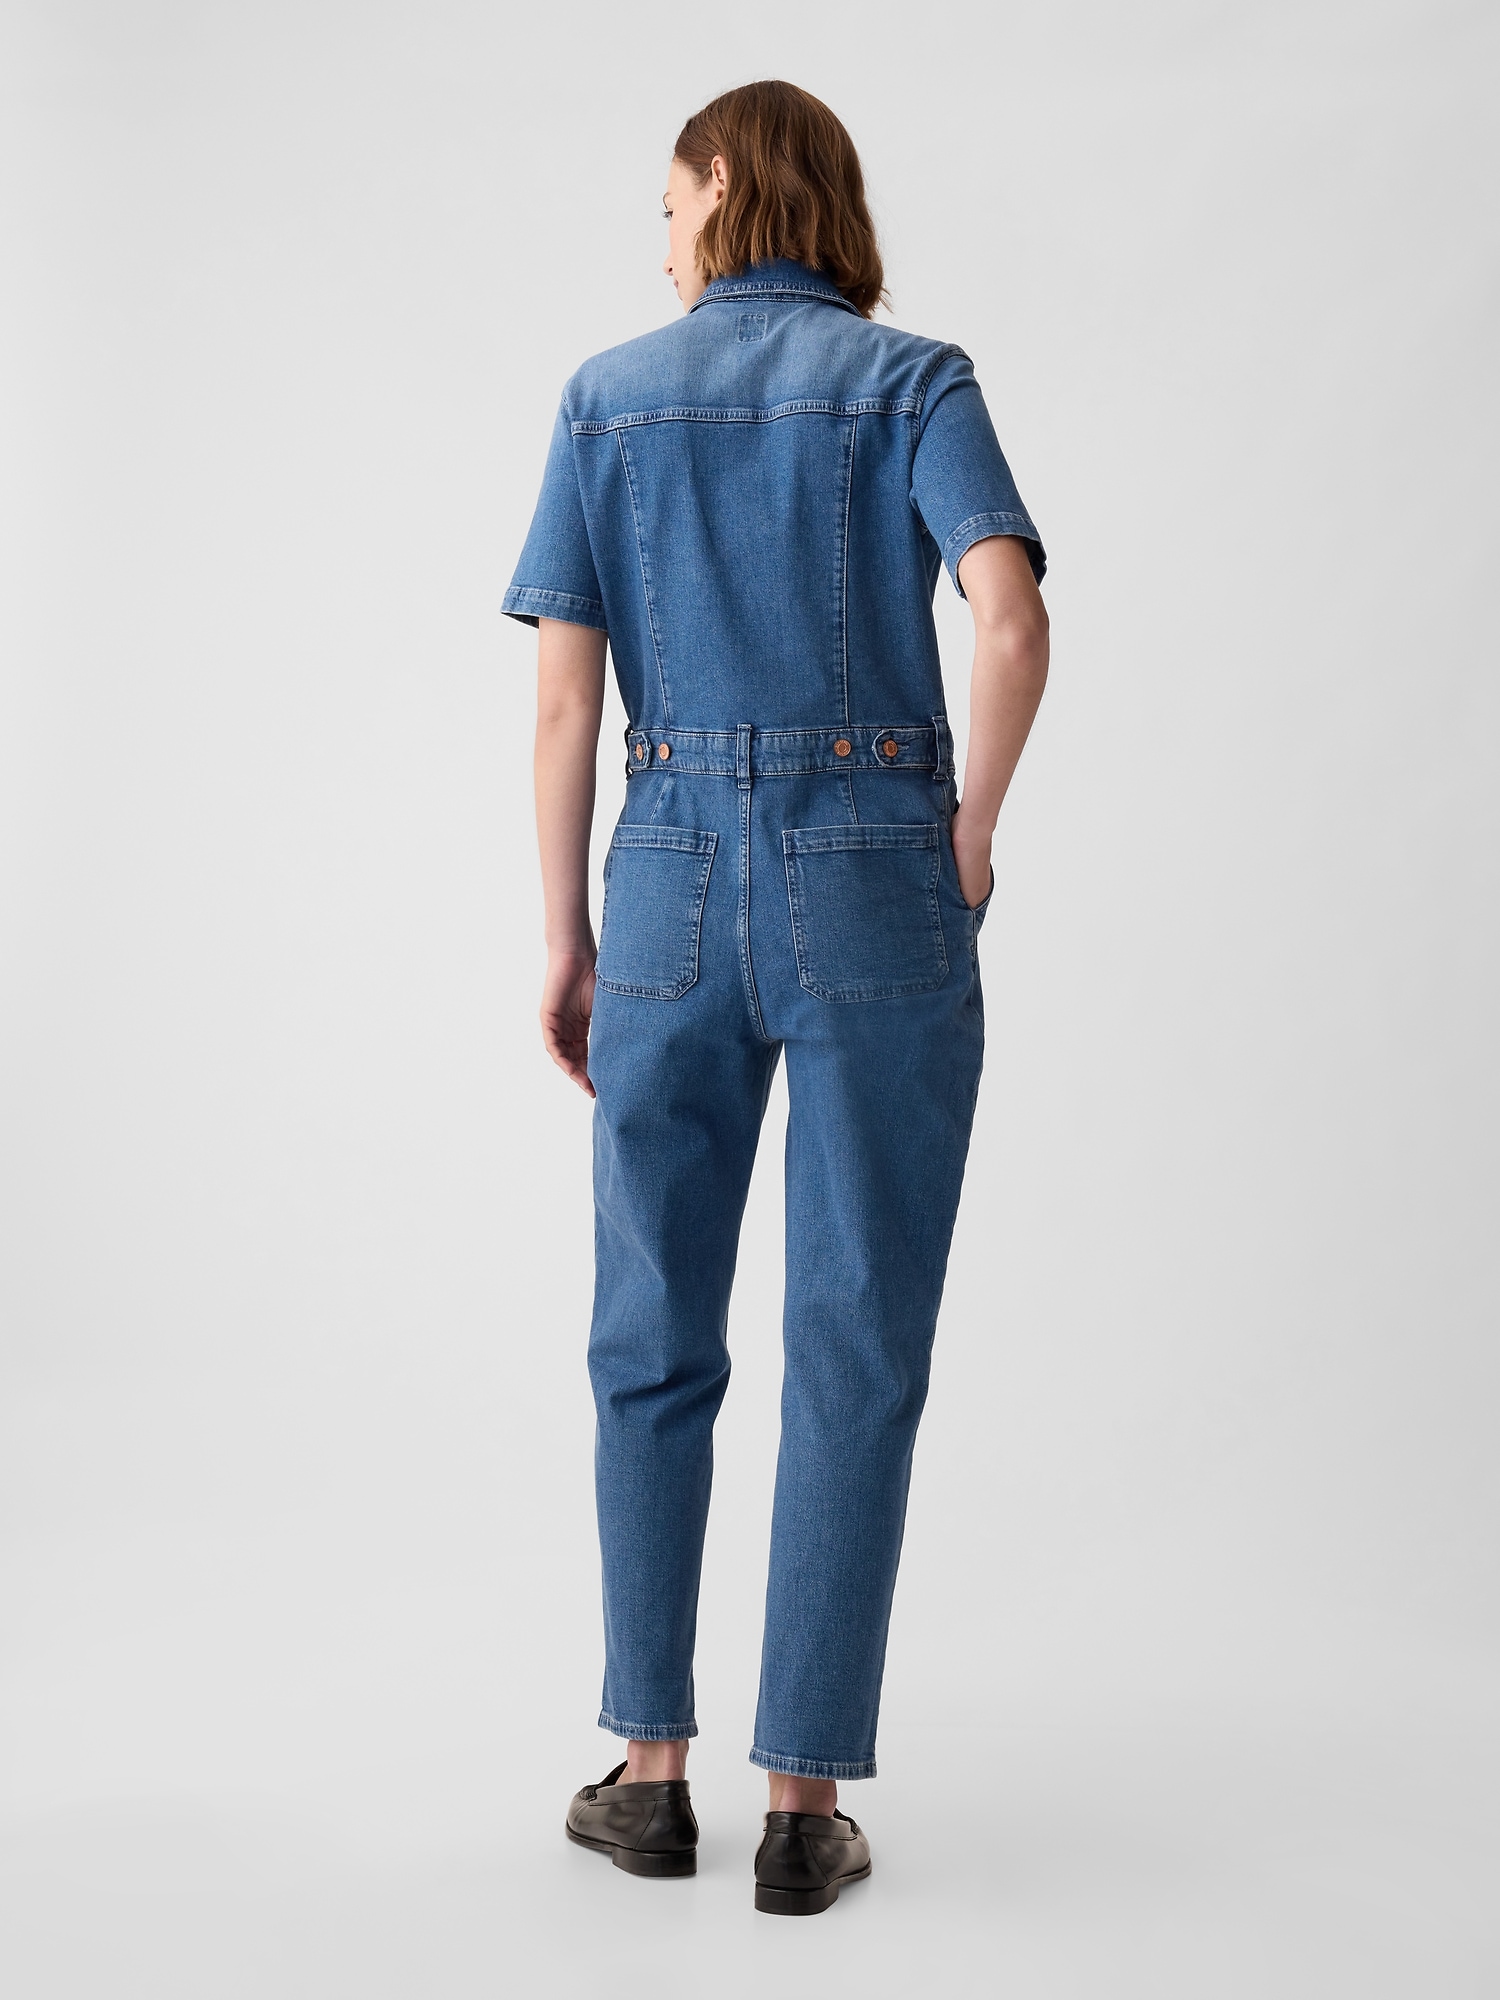 What Denim Has Looked Like Over Time, From Jeans to Jumpsuits